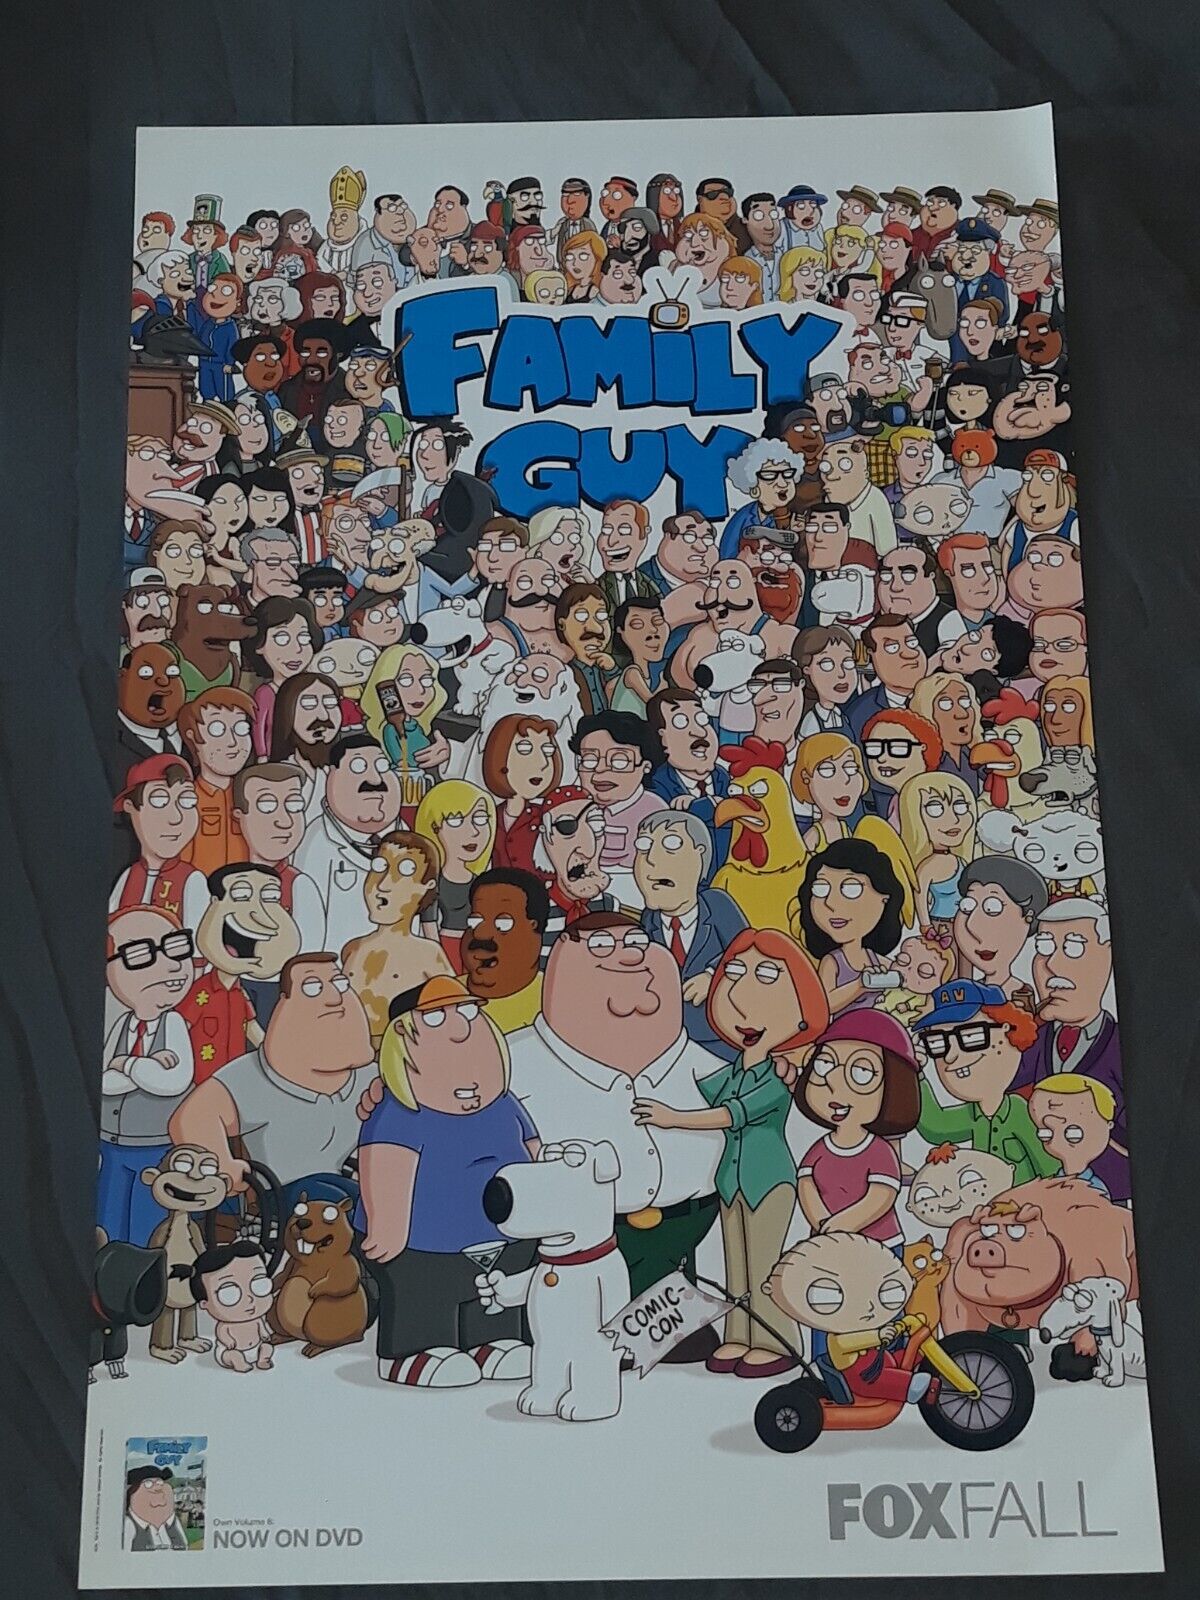 SDCC 2010 Comic Con Exclusive FAMILY GUY Character Cast Promo POSTER. Rare 11x17